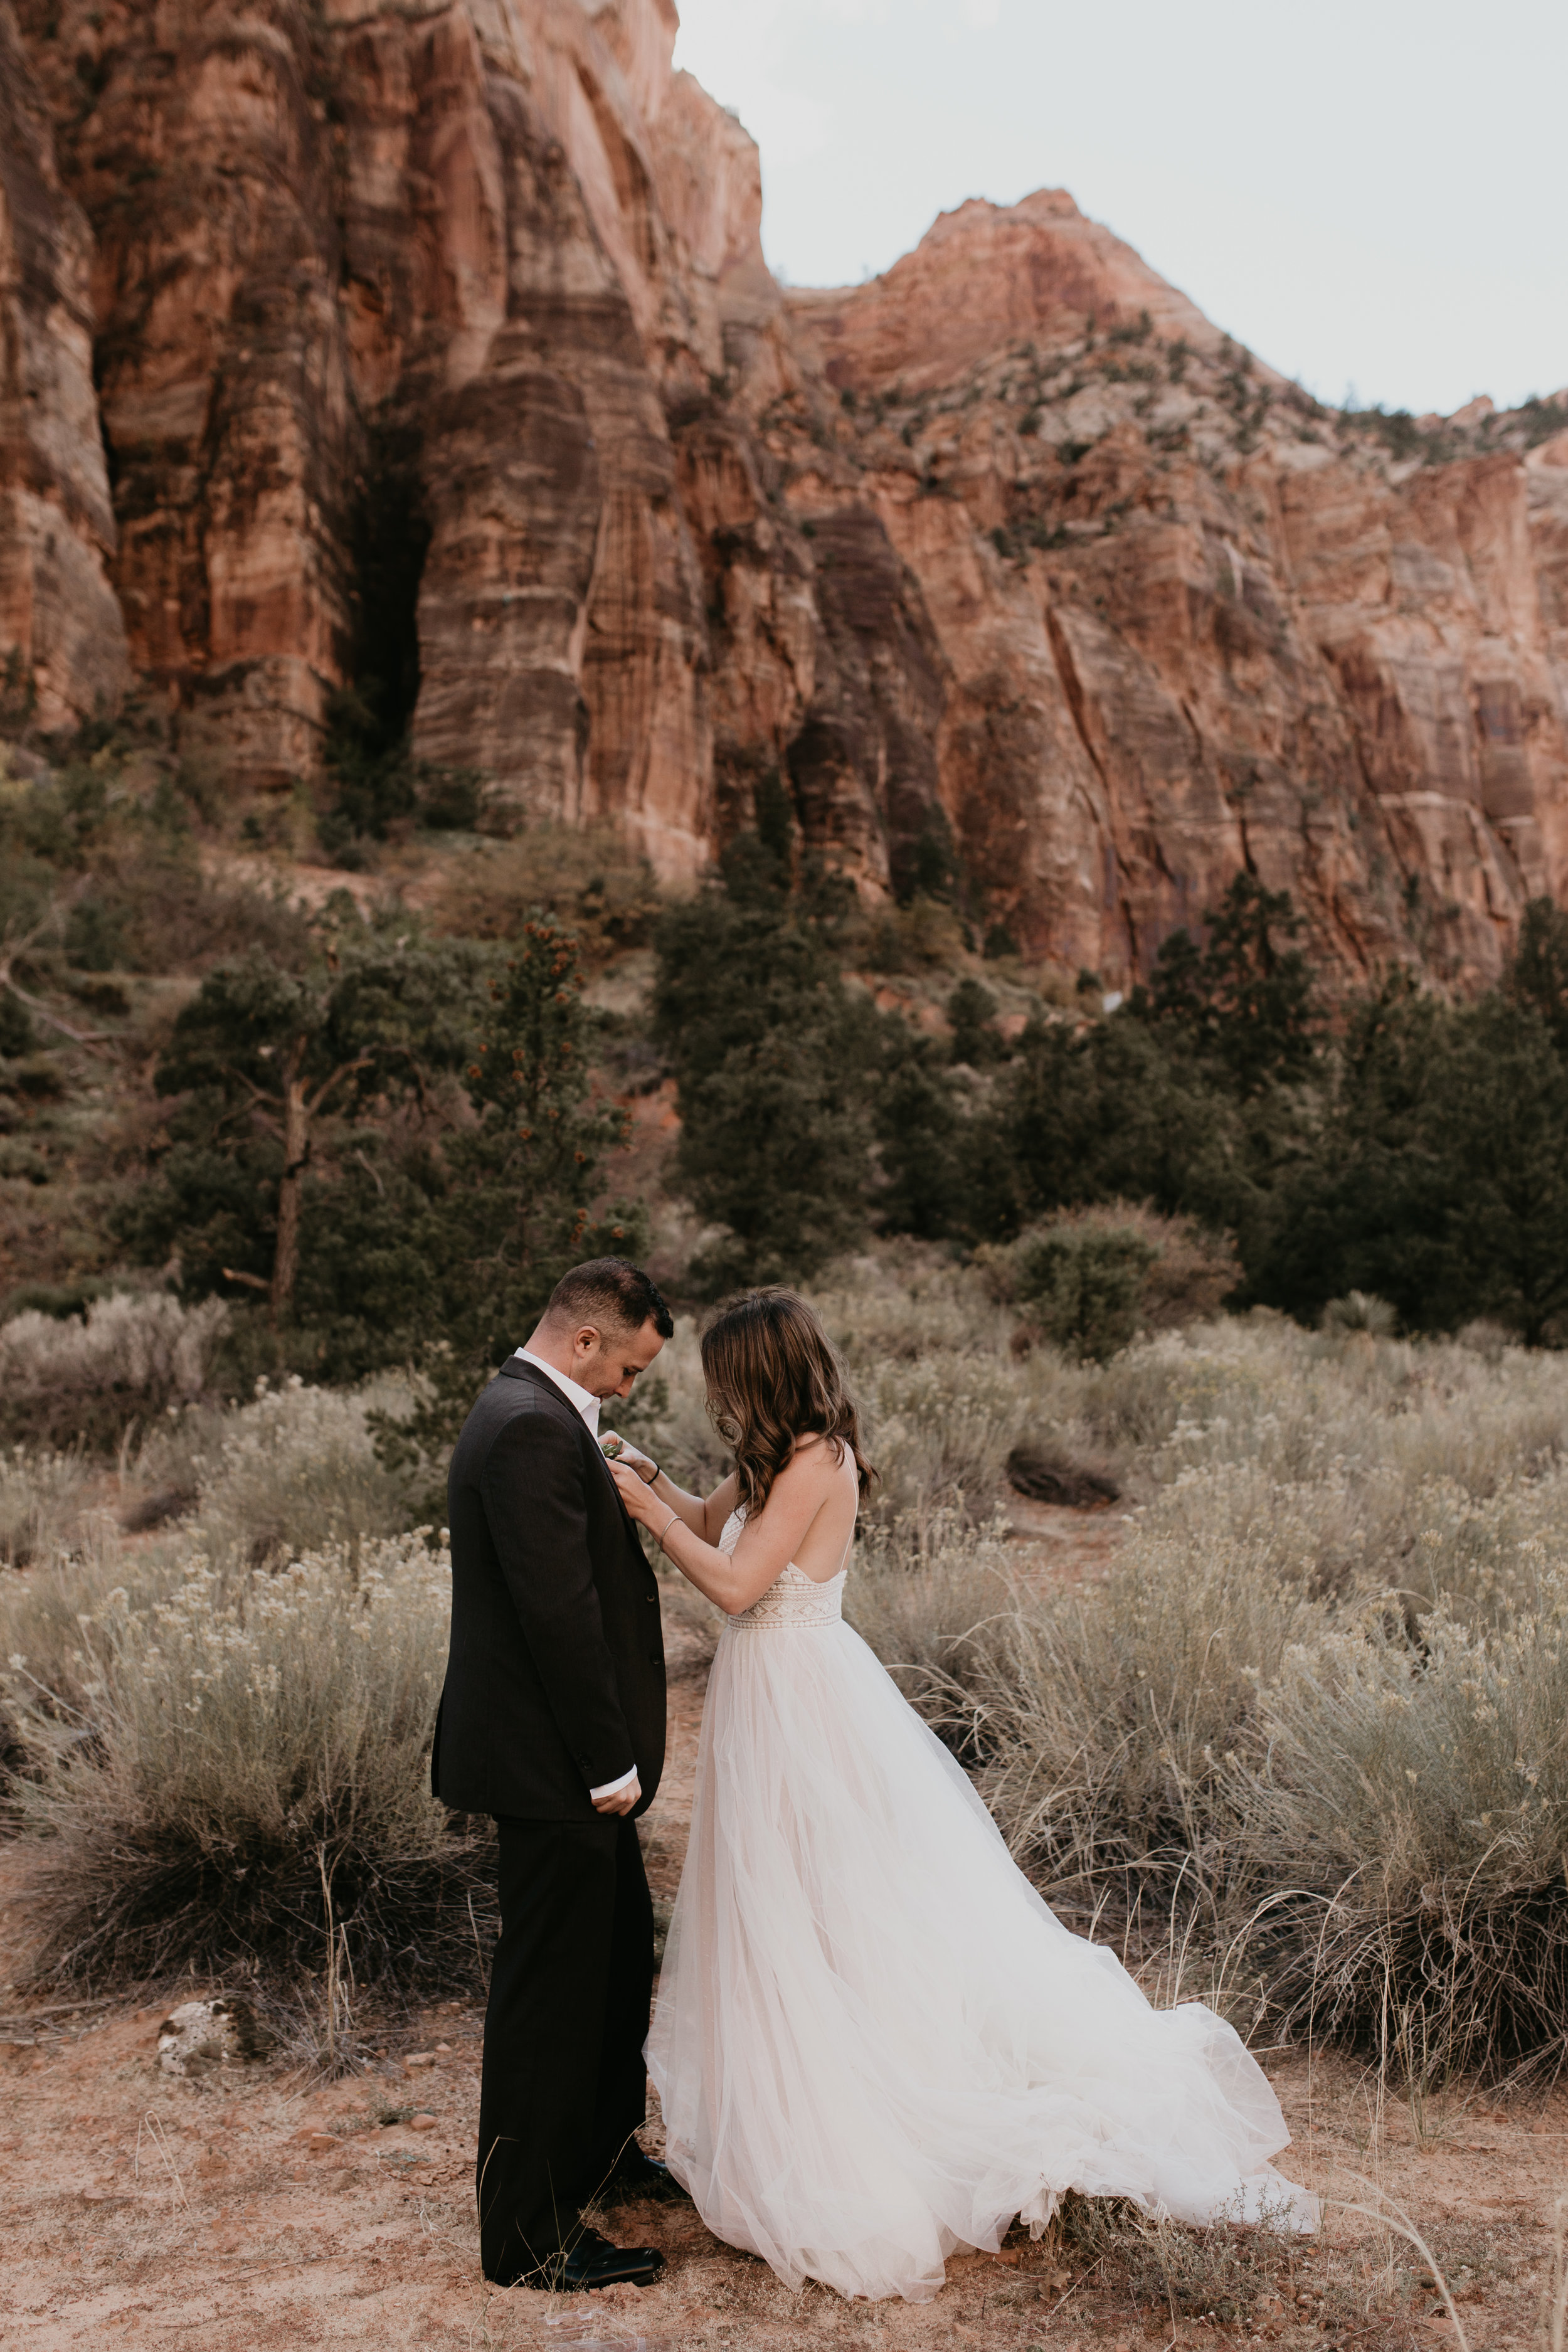 nicole-daacke-photography-zion-national-park-elopement-photographer-canyon-overlook-trail-elope-hiking-adventure-wedding-photos-fall-utah-red-rock-canyon-stgeorge-eloping-photographer-13.jpg